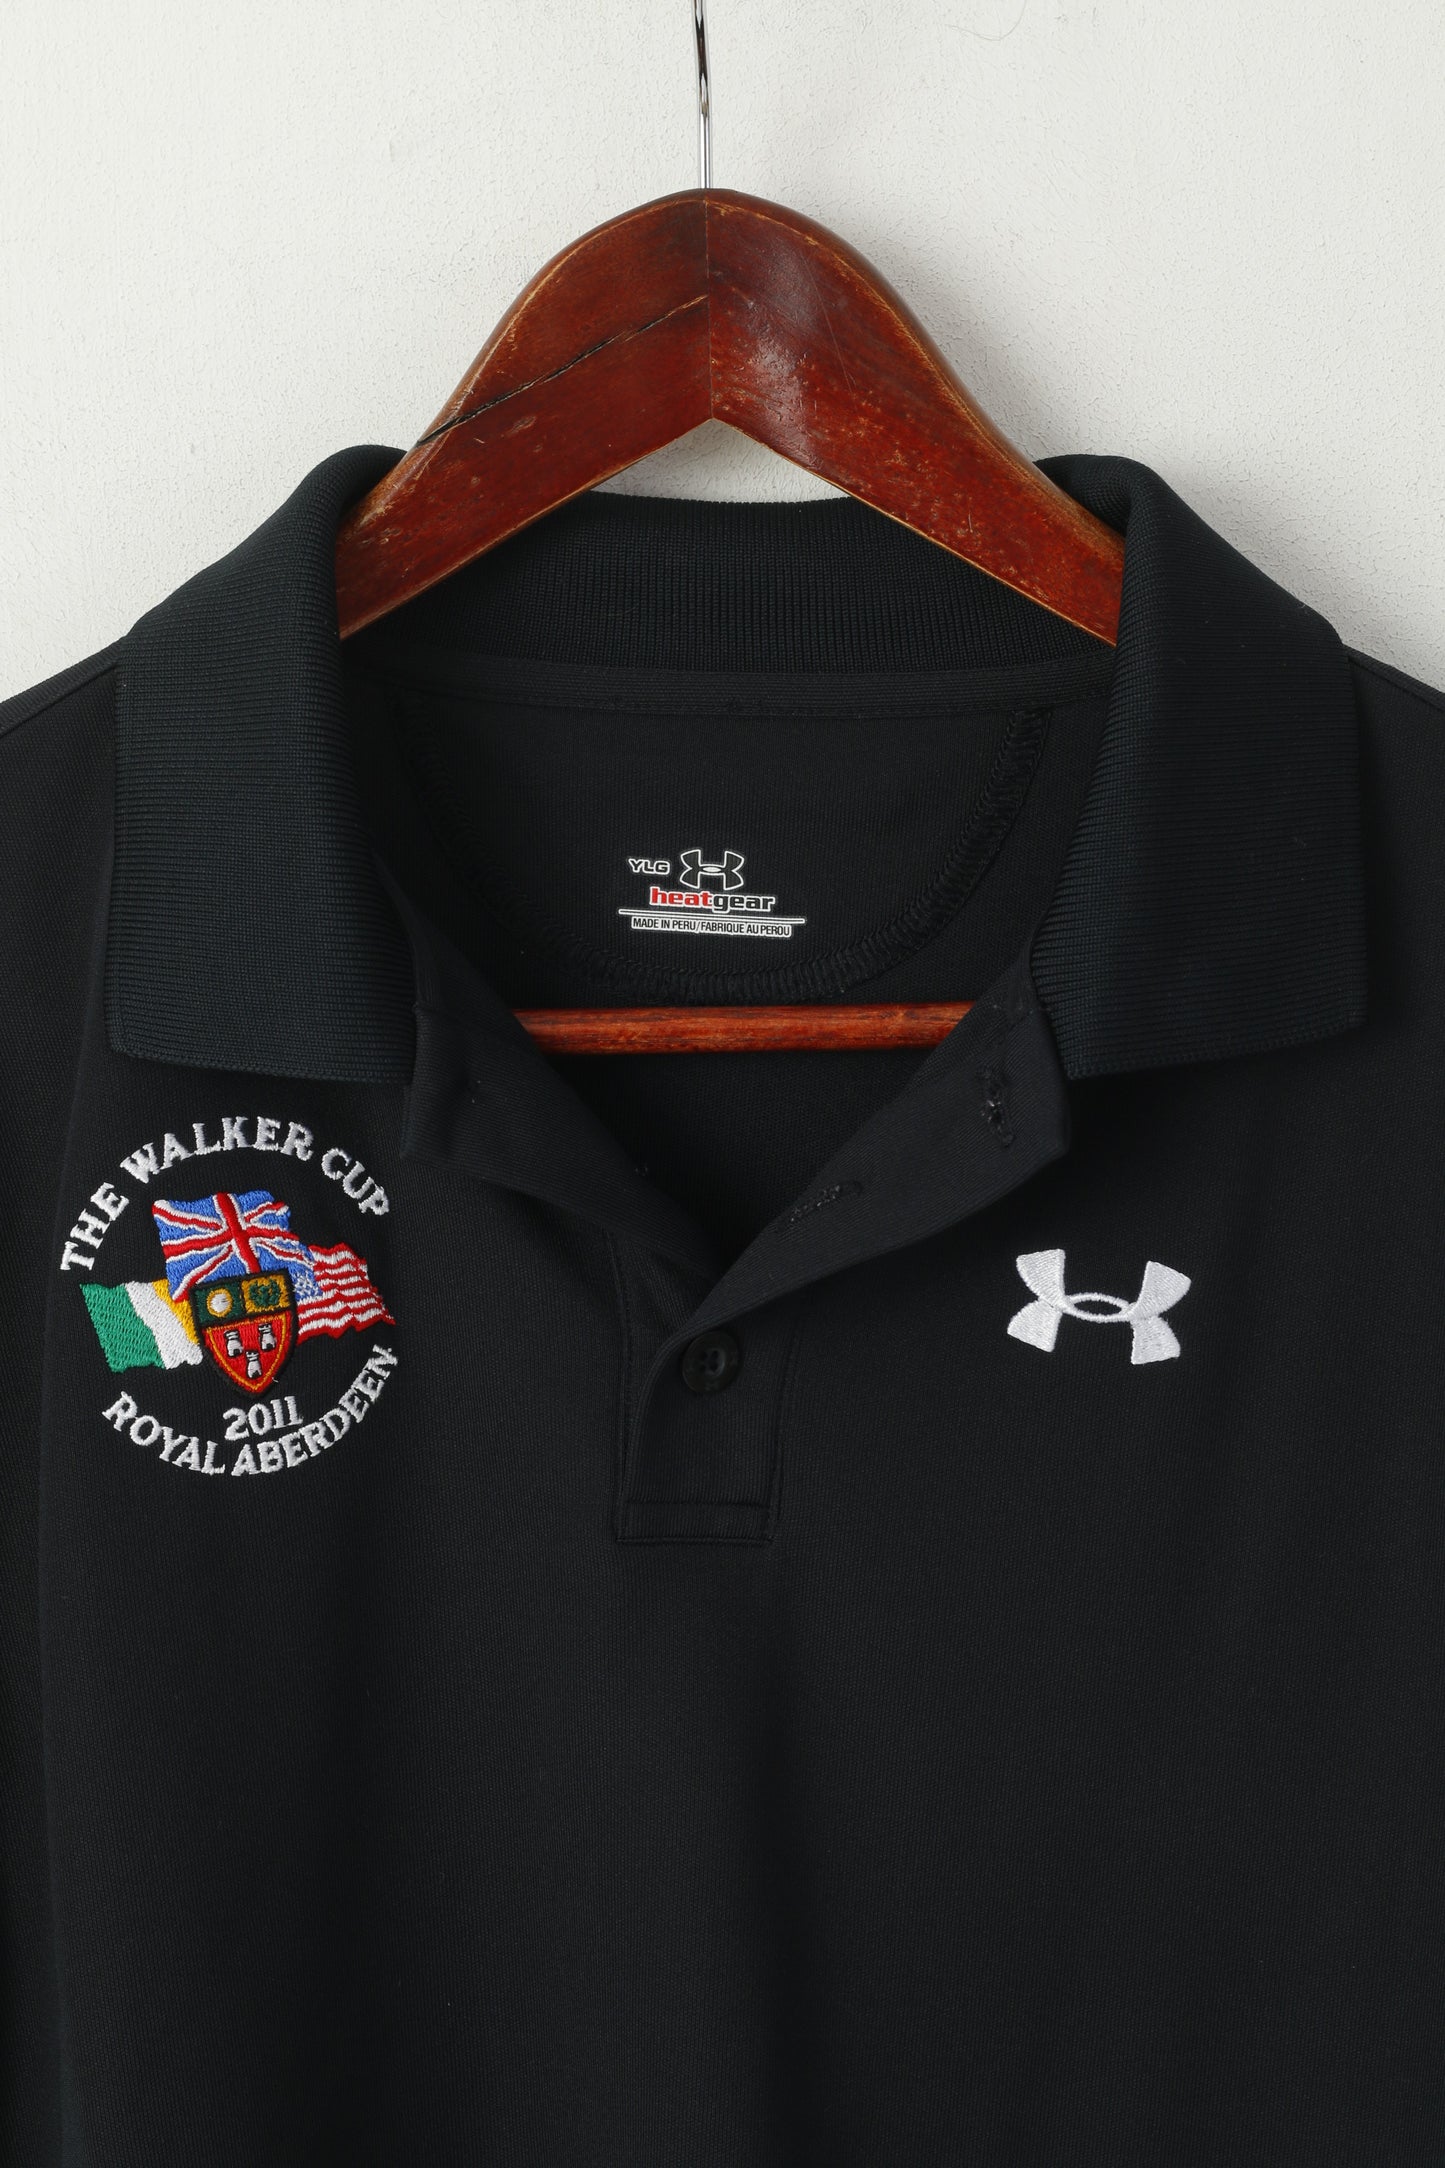 Under Armour Boys YLG 10 Age Shirt Black The Walker Cup 2011 Sport Jersey Top